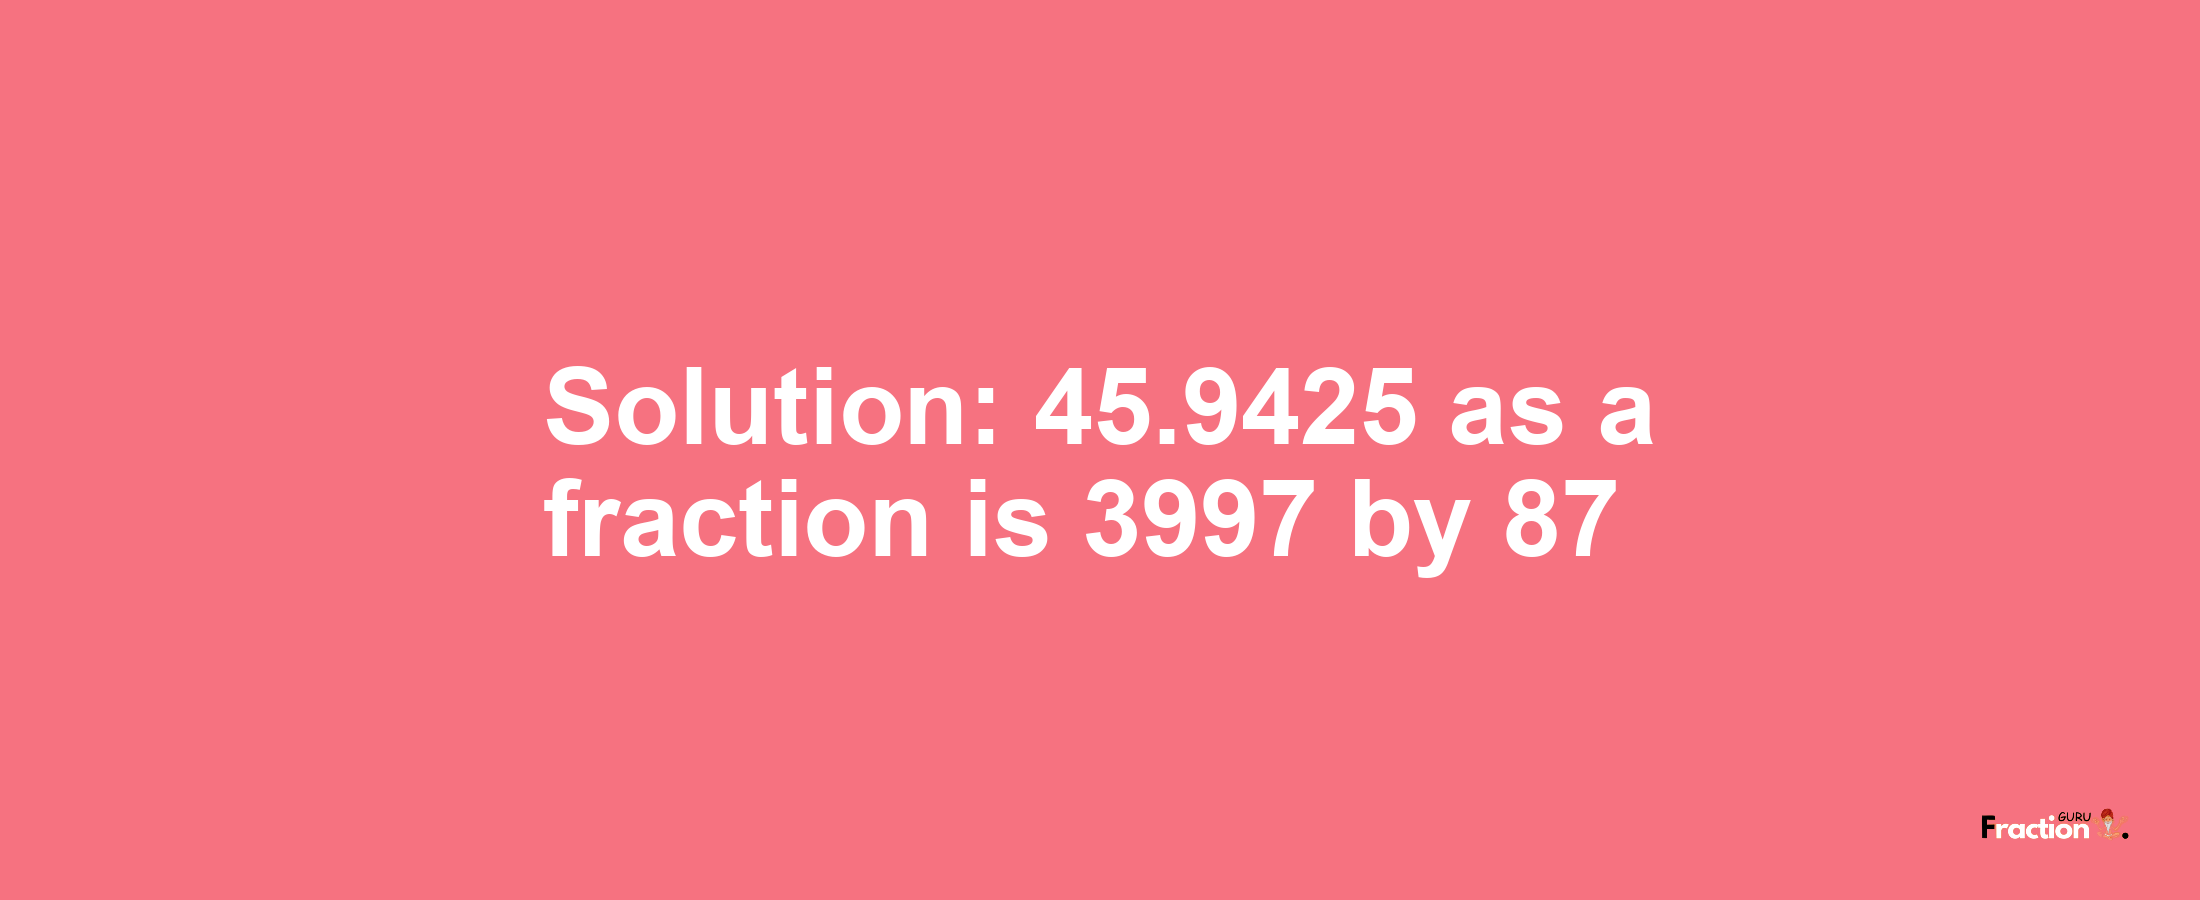 Solution:45.9425 as a fraction is 3997/87